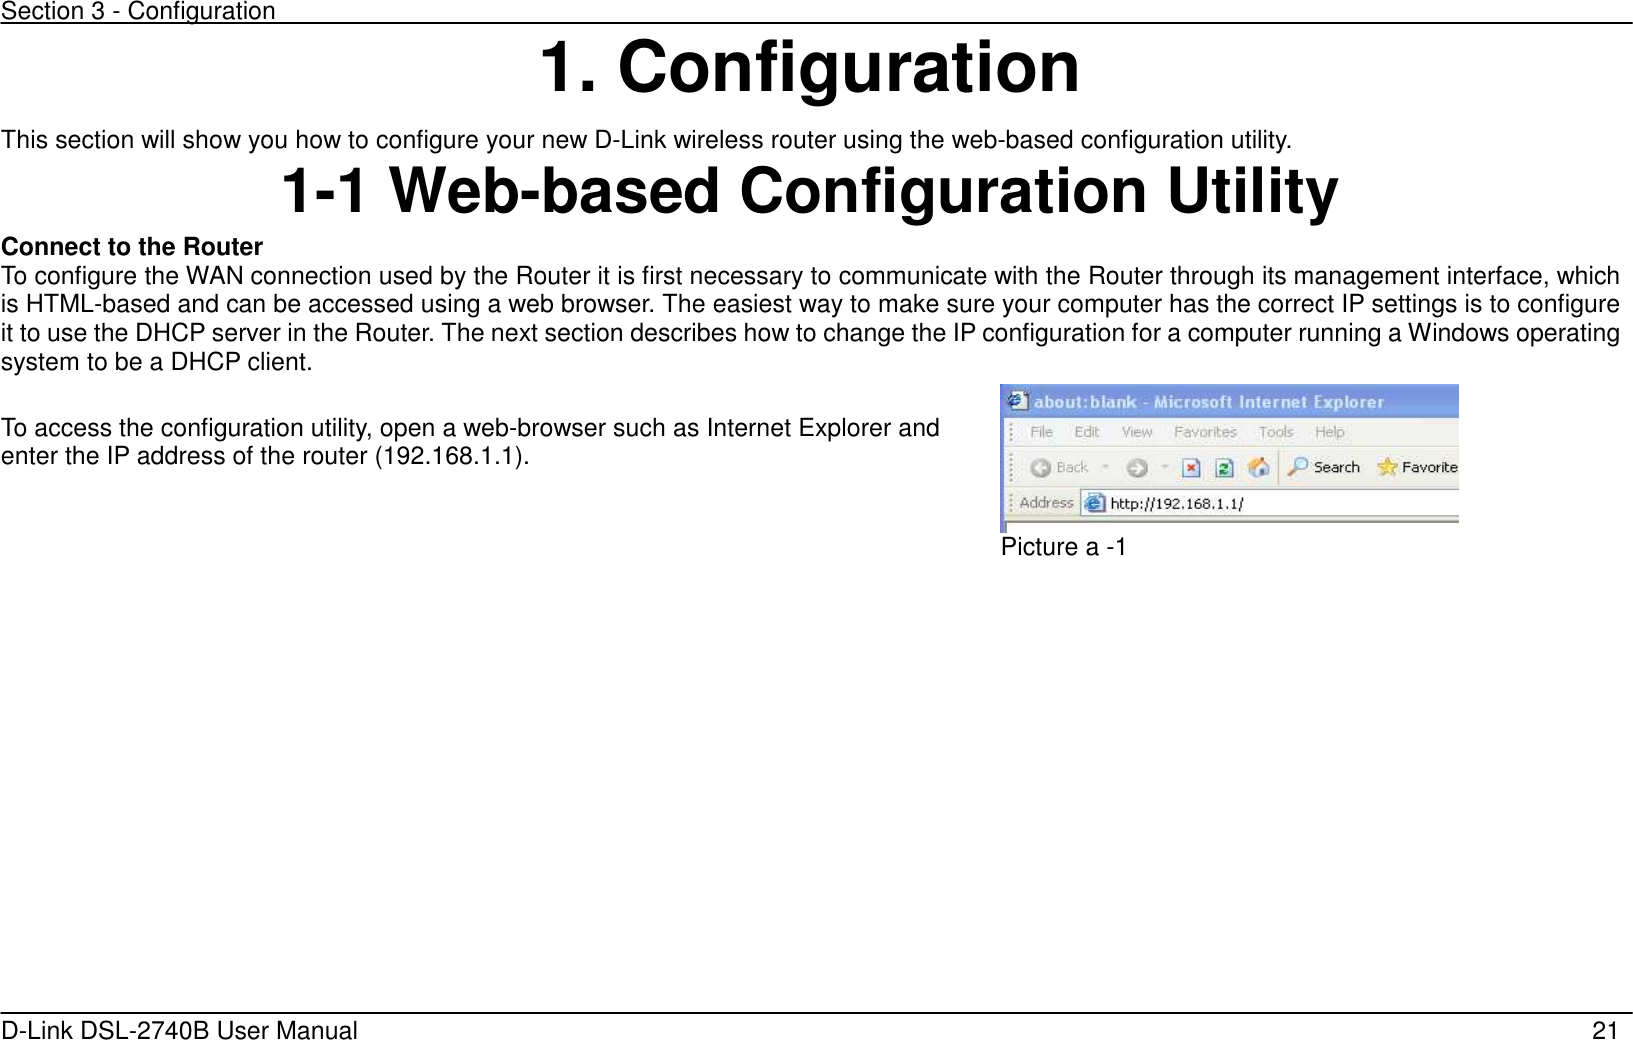 Section 3 - Configuration   D-Link DSL-2740B User Manual                                                  21 1. Configuration This section will show you how to configure your new D-Link wireless router using the web-based configuration utility. 1-1 Web-based Configuration Utility Connect to the Router   To configure the WAN connection used by the Router it is first necessary to communicate with the Router through its management interface, which is HTML-based and can be accessed using a web browser. The easiest way to make sure your computer has the correct IP settings is to configure it to use the DHCP server in the Router. The next section describes how to change the IP configuration for a computer running a Windows operating system to be a DHCP client.  To access the configuration utility, open a web-browser such as Internet Explorer and enter the IP address of the router (192.168.1.1).  Picture a -1    